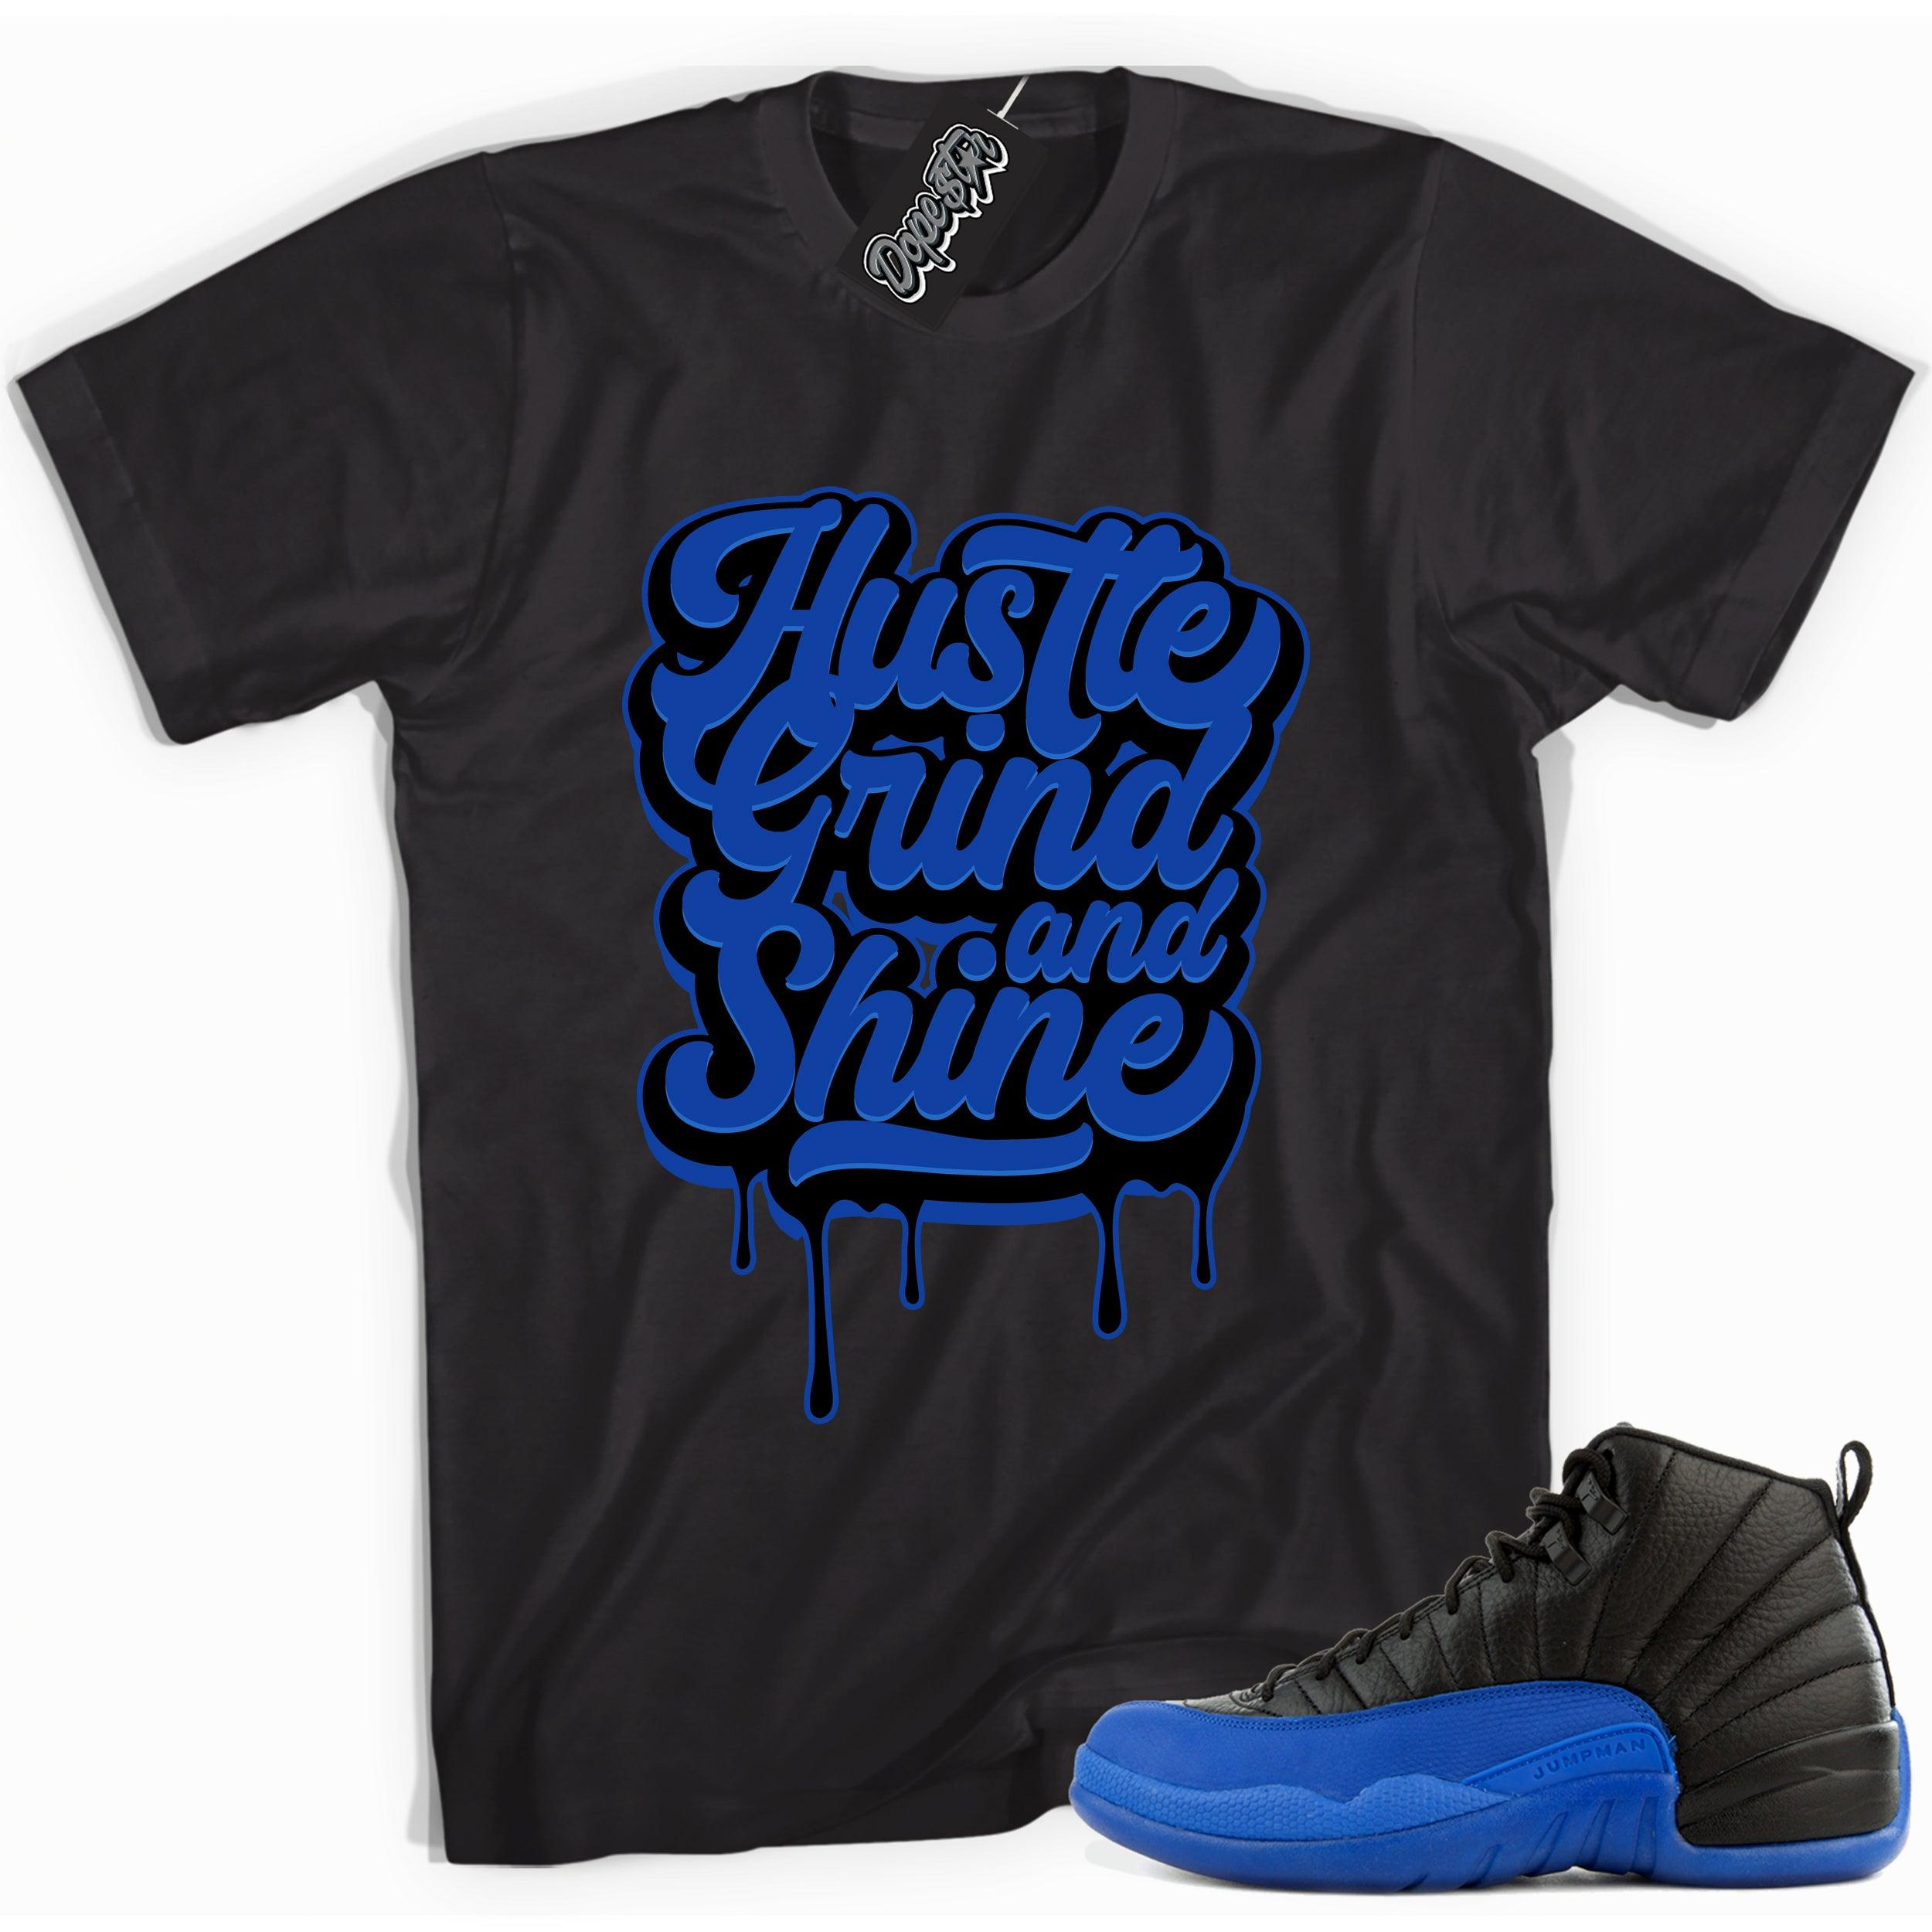 Cool black graphic tee with 'hustle grind shine' print, that perfectly matches  Air Jordan 12 Retro Black Game Royal sneakers.